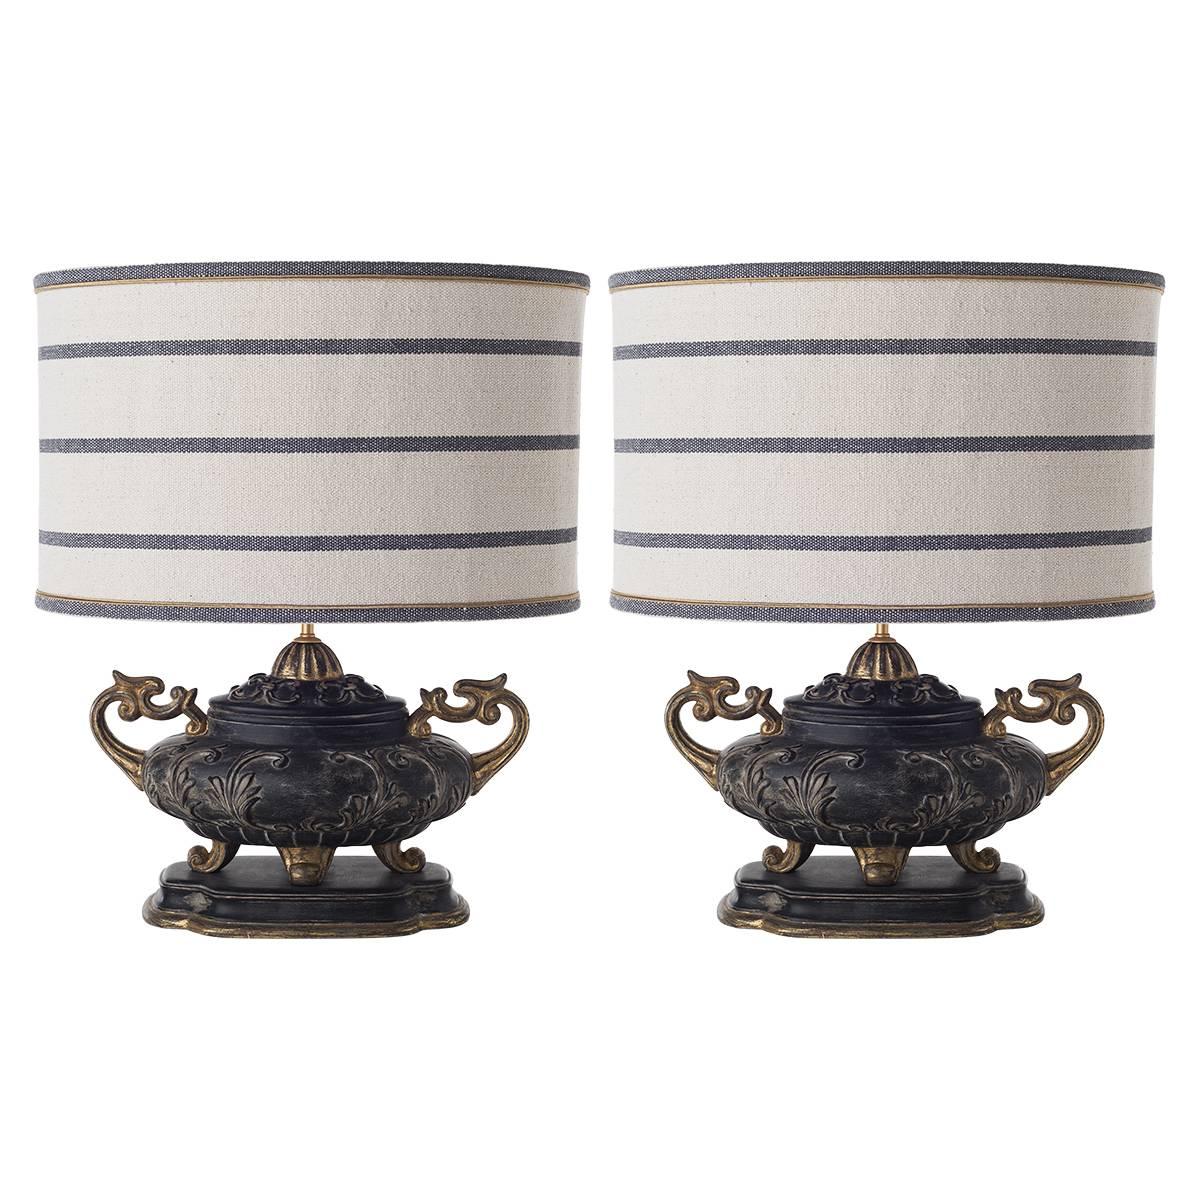 Pair of Double-Armed Table Lamps For Sale